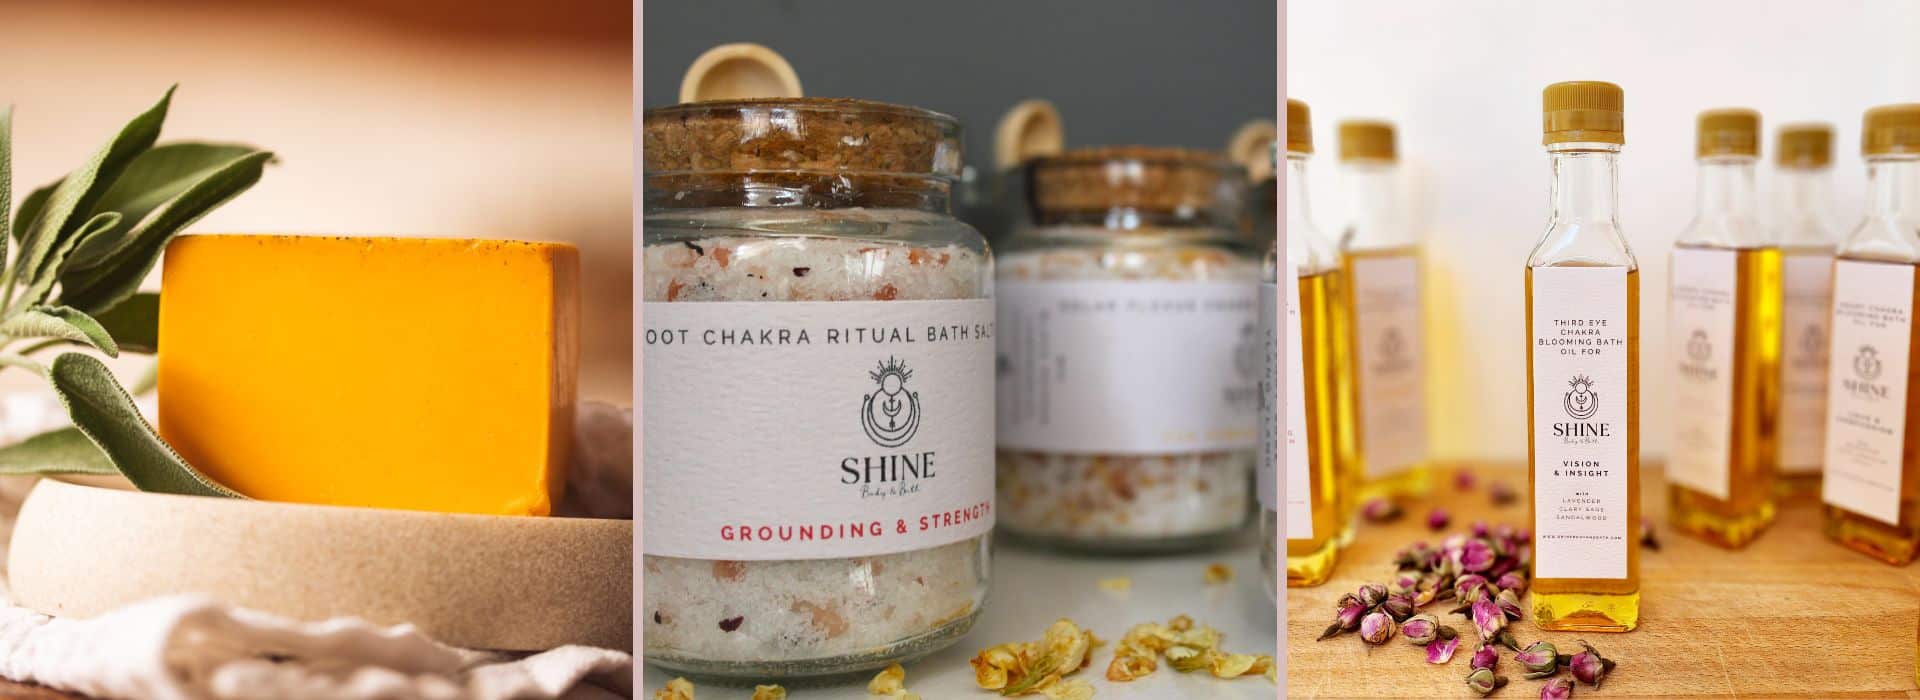 Trio of images of Shine Body & Bath products | About Shine Body & Bath